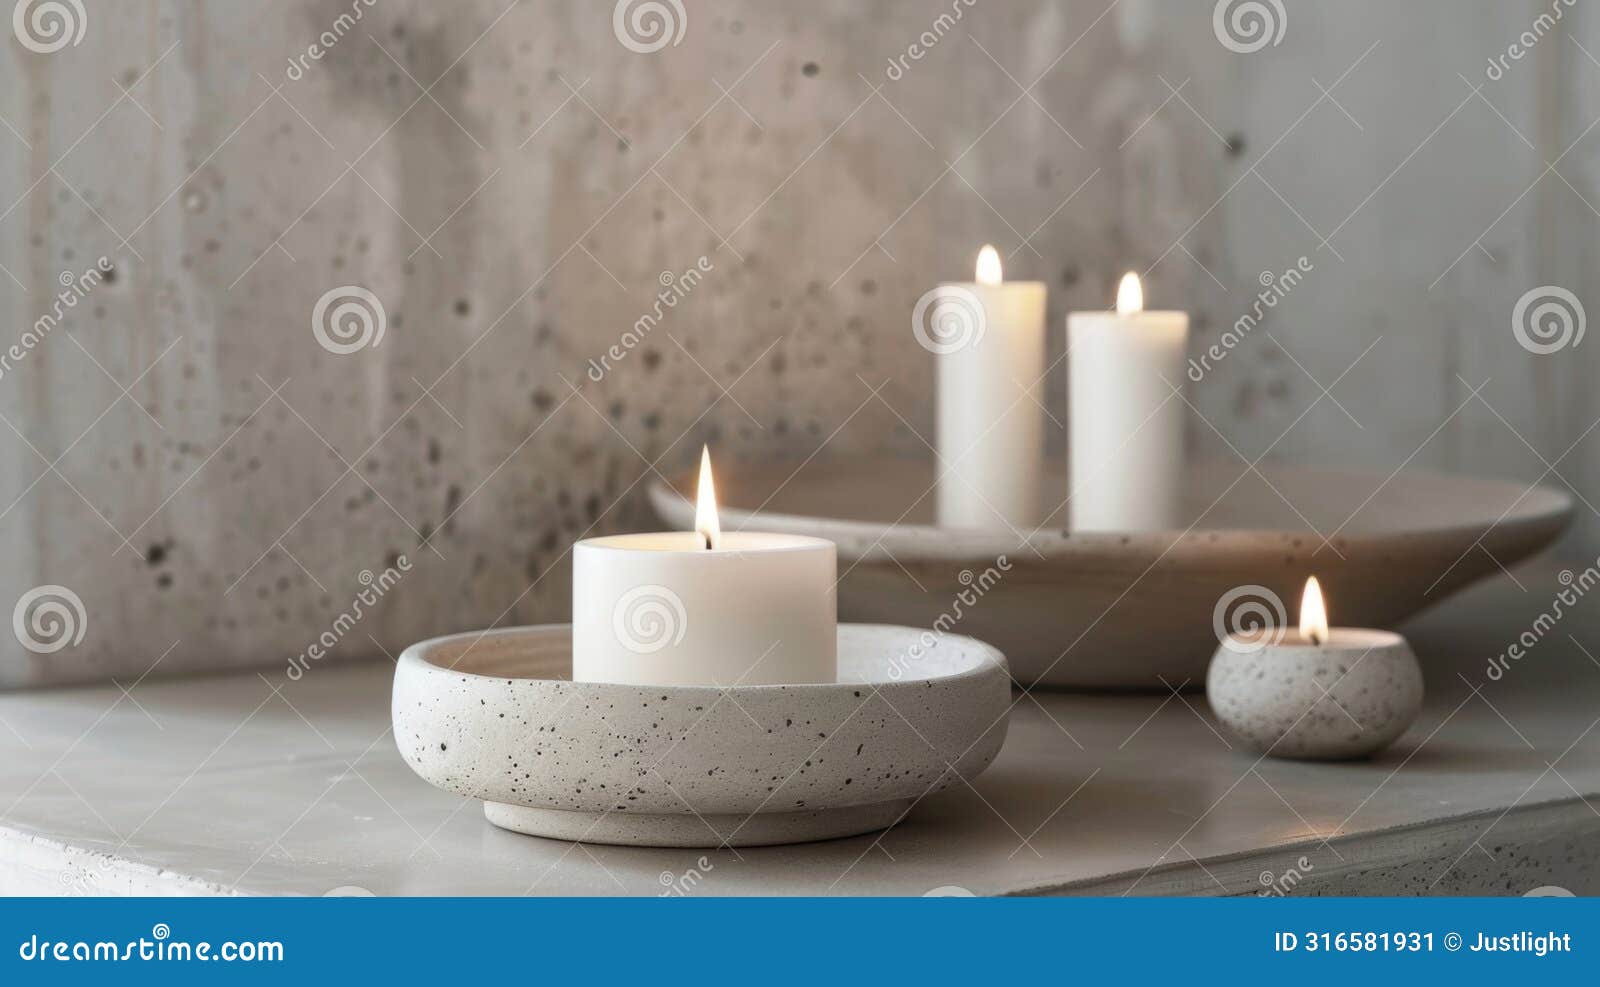 the white candles seem to amplify the raw and natural beauty of the concrete holders highlighting their unique